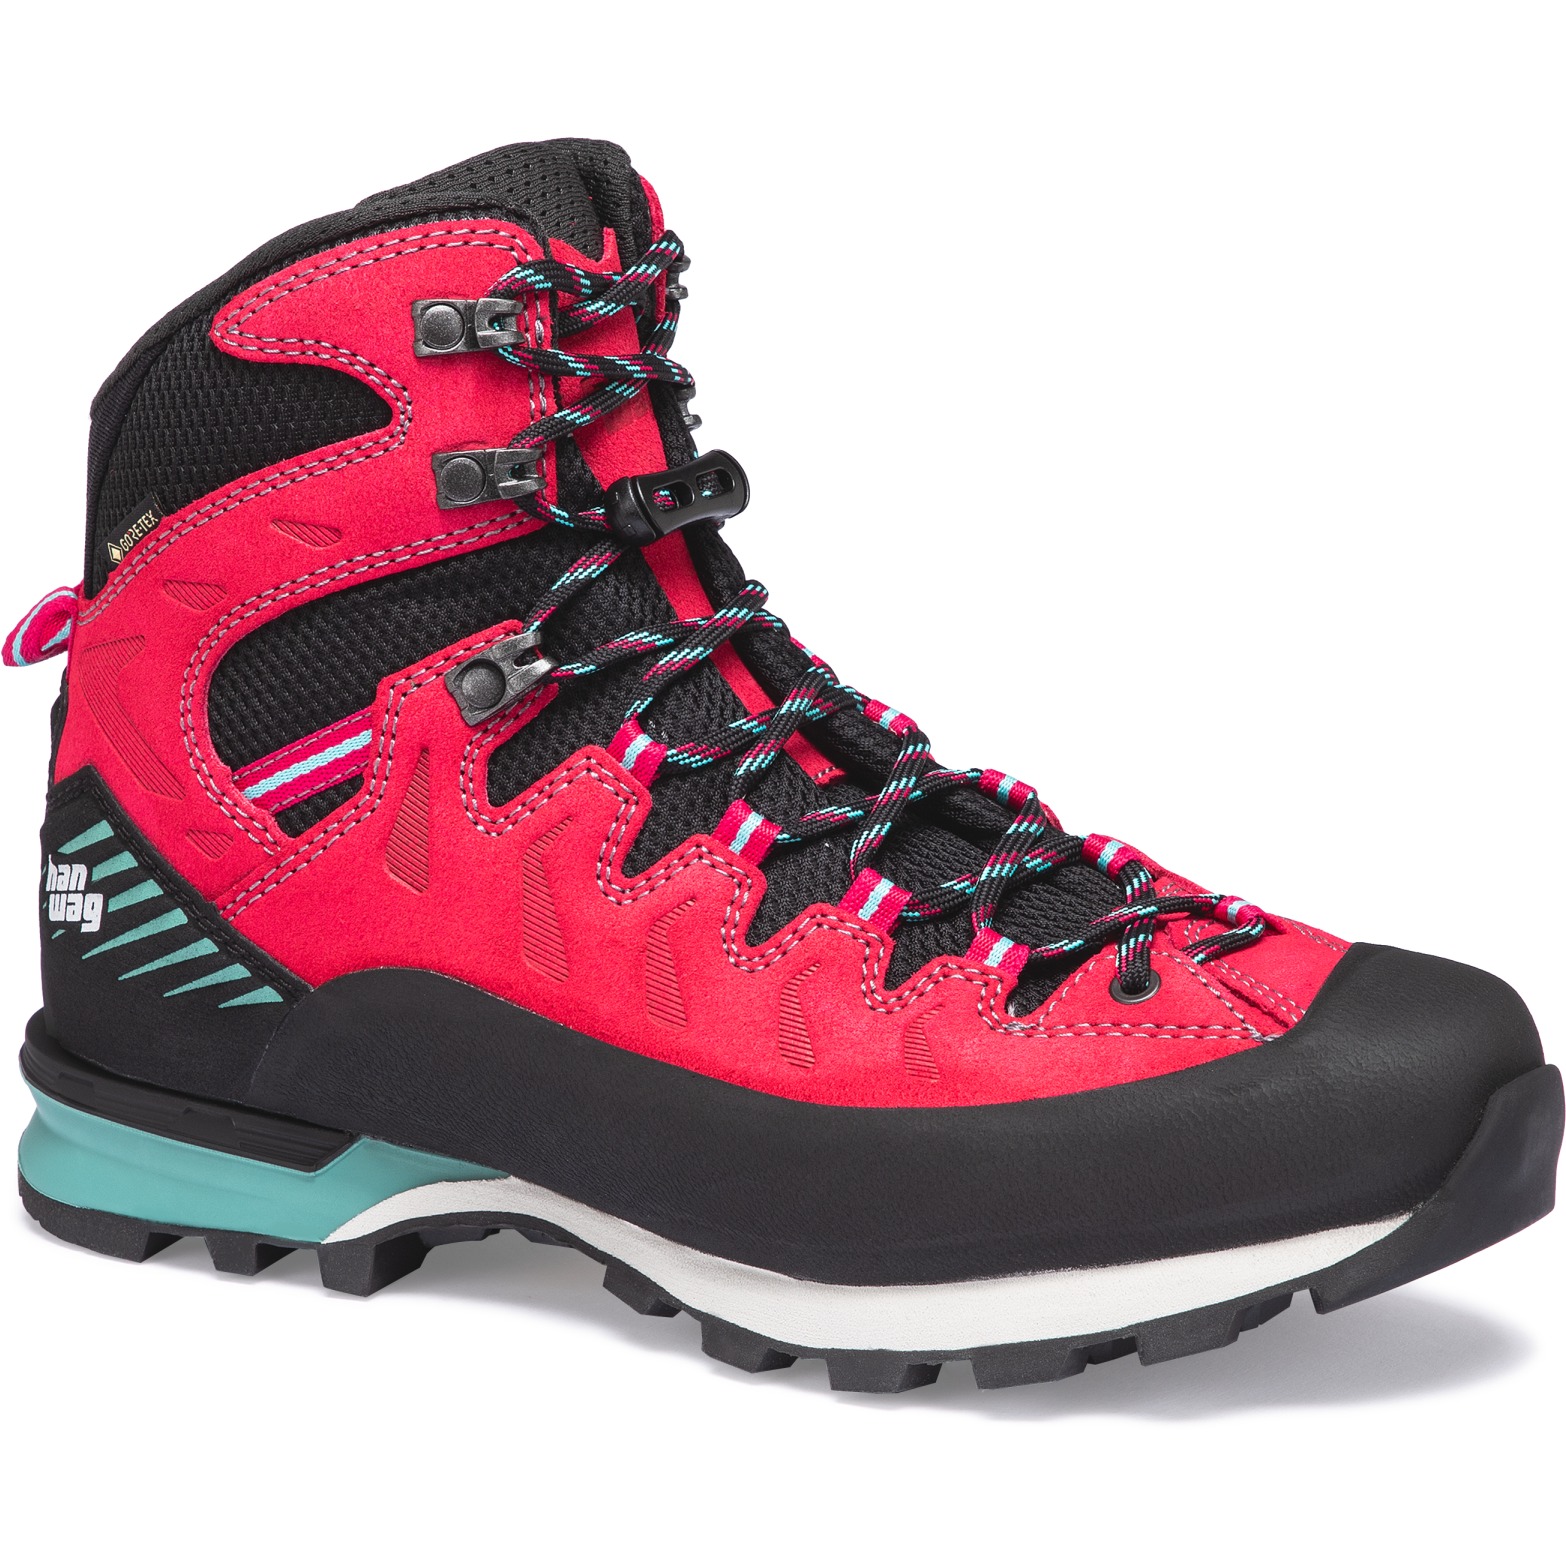 Picture of Hanwag Makra Pro GTX Mountaineering Boots Women - Pink/Mint